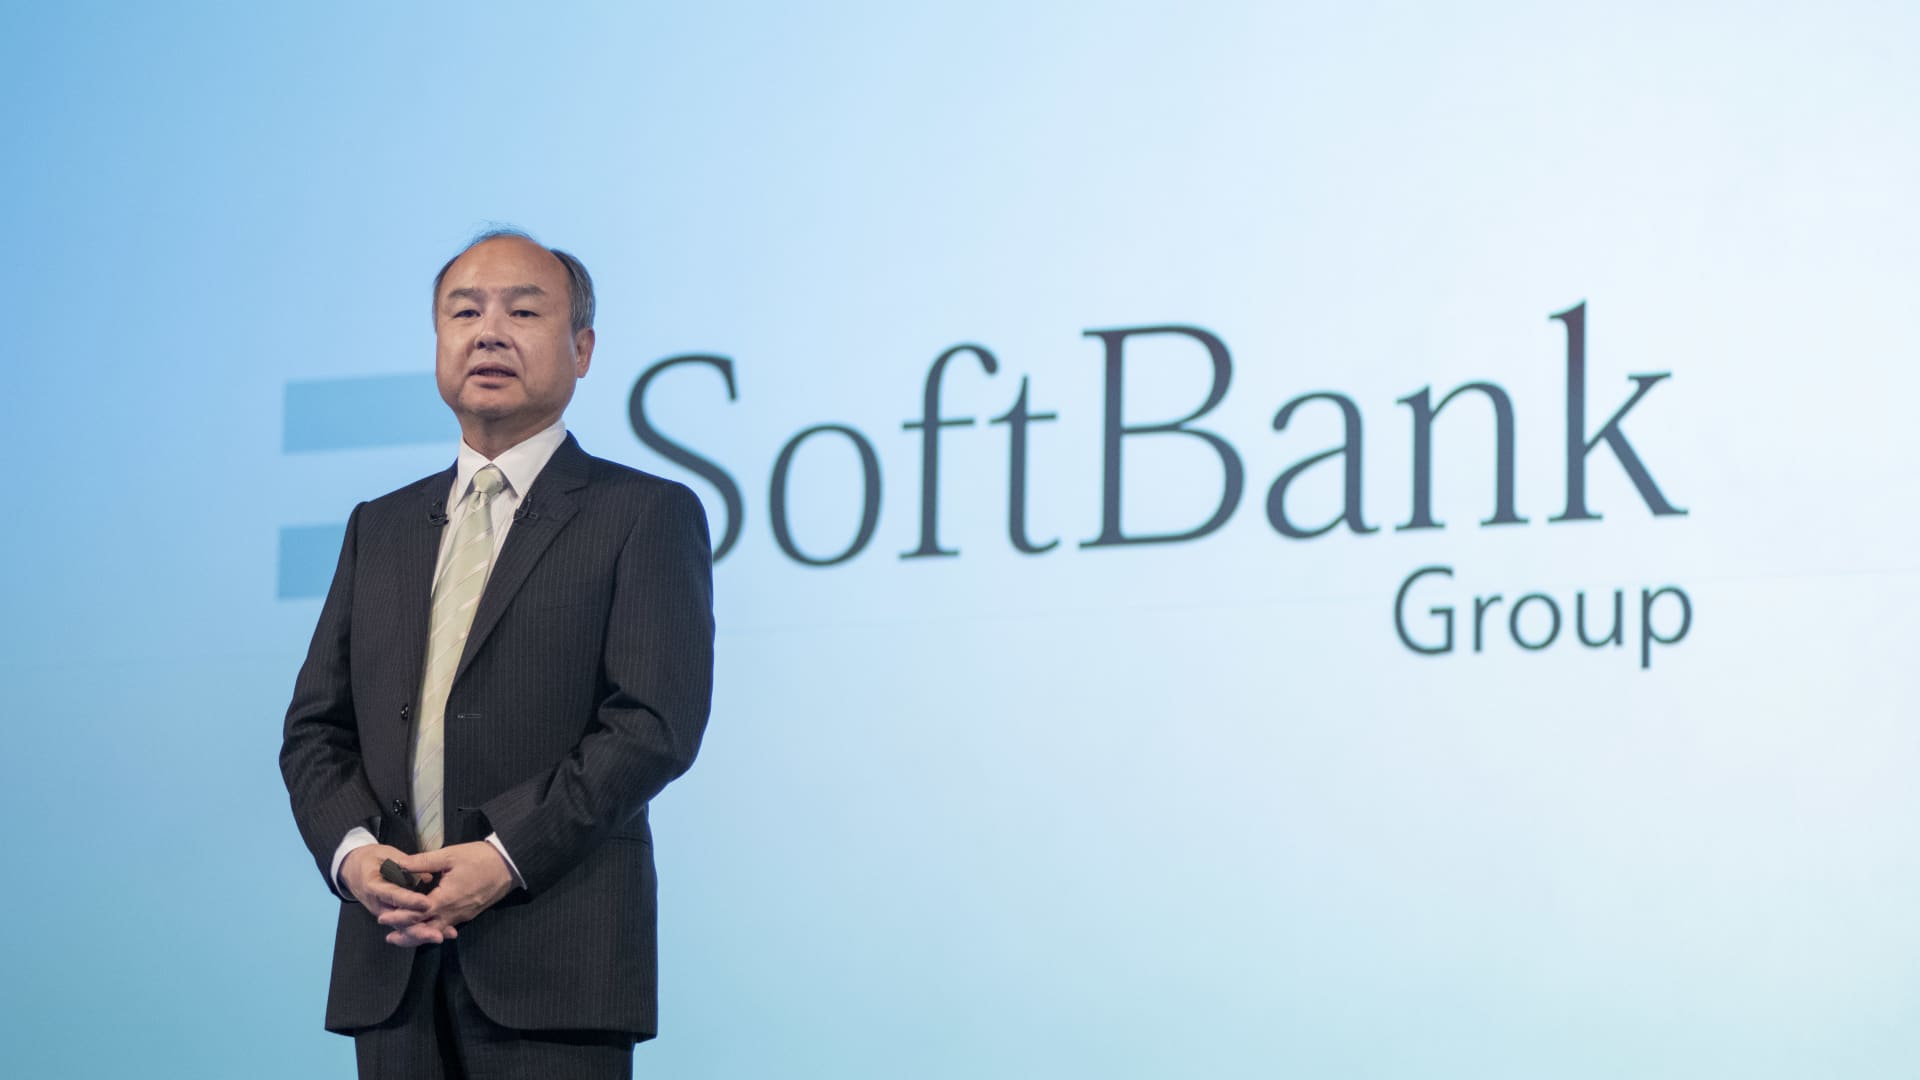 SoftBank plans at least 30% staff cuts to Vision Fund, source confirms